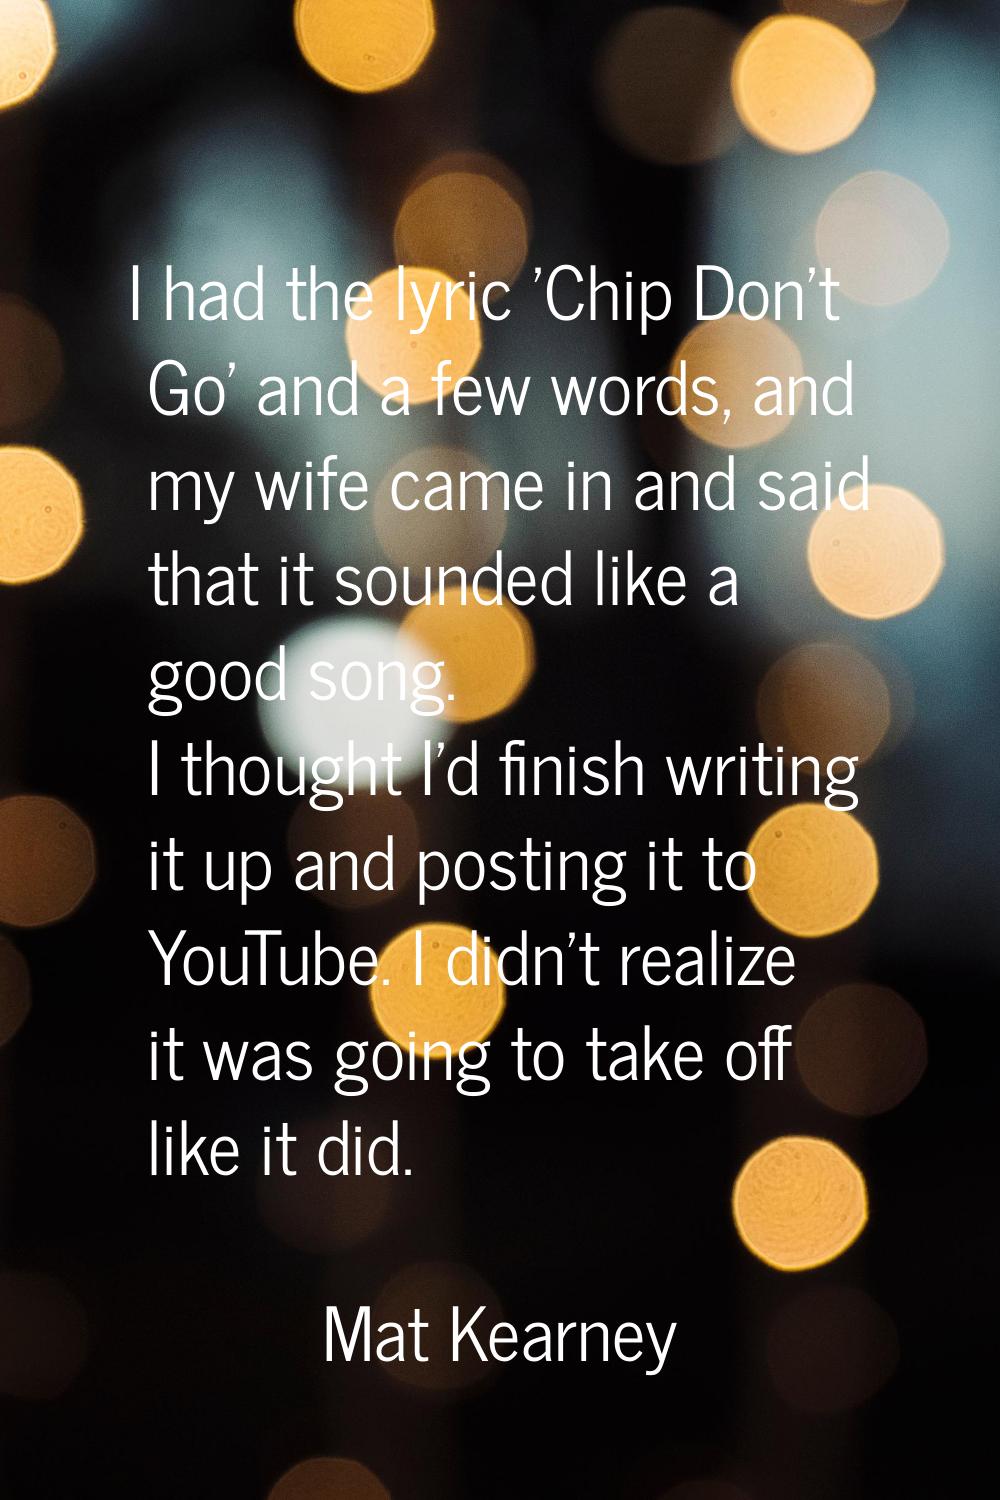 I had the lyric 'Chip Don't Go' and a few words, and my wife came in and said that it sounded like 